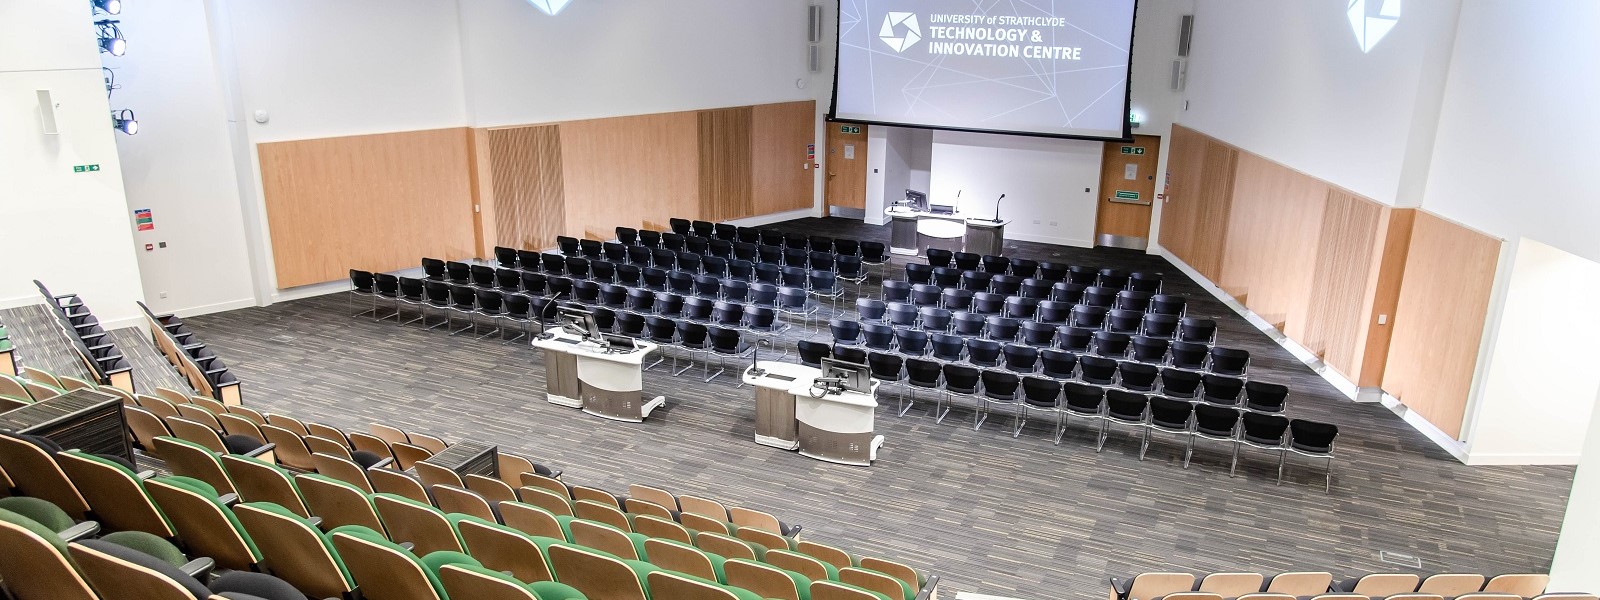 Main Auditorium in the Technology and Innovation Centre, view from rear.  Photo: Lucy Knott